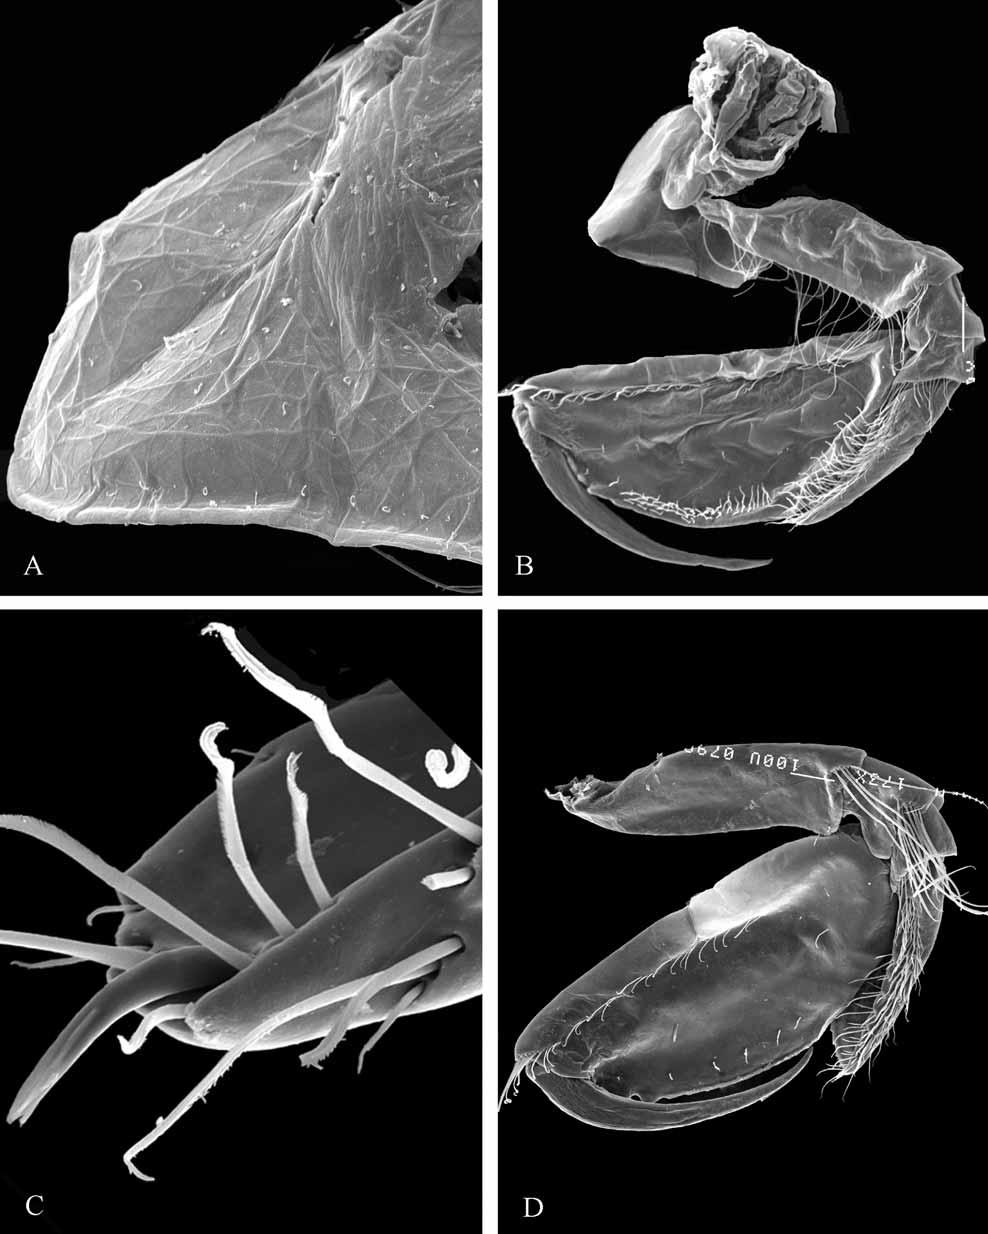 rior setae in holotype A ); gnathopod 2, basis anterior margin with 15 long setae (versus 13 short setae in male); distomedial setal tufts on articles 2 and 3 reduced in length, carpal lobe, apically